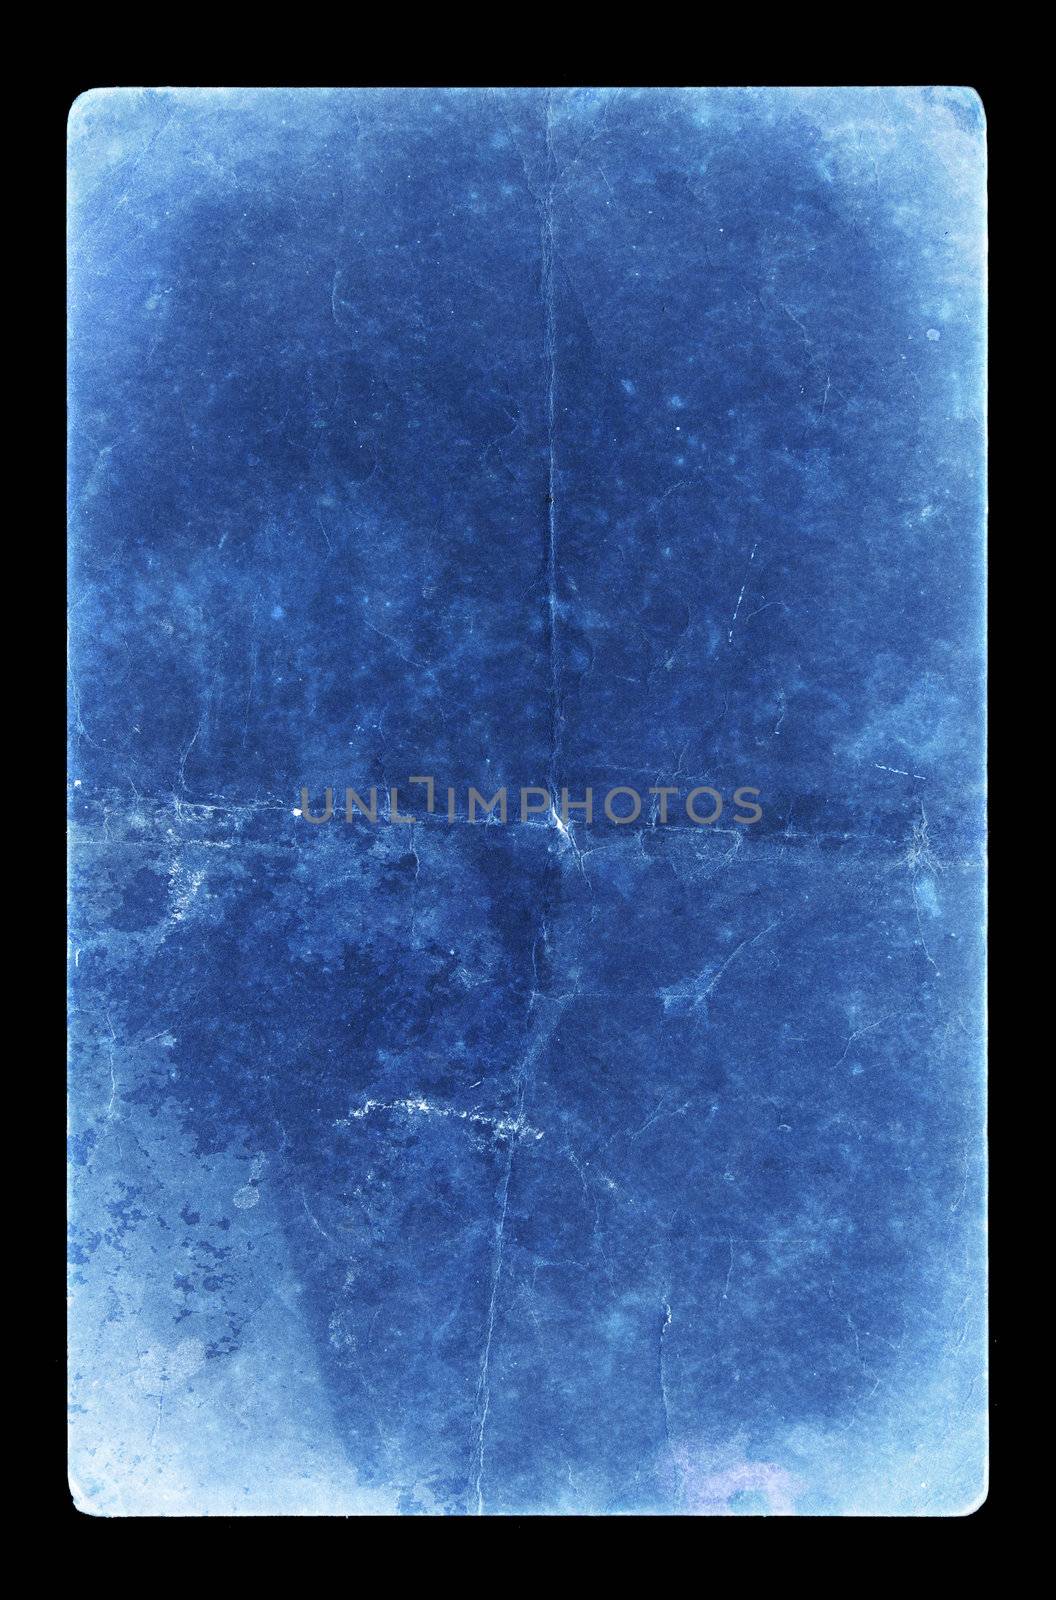 An isolated old grunge paper on a black background